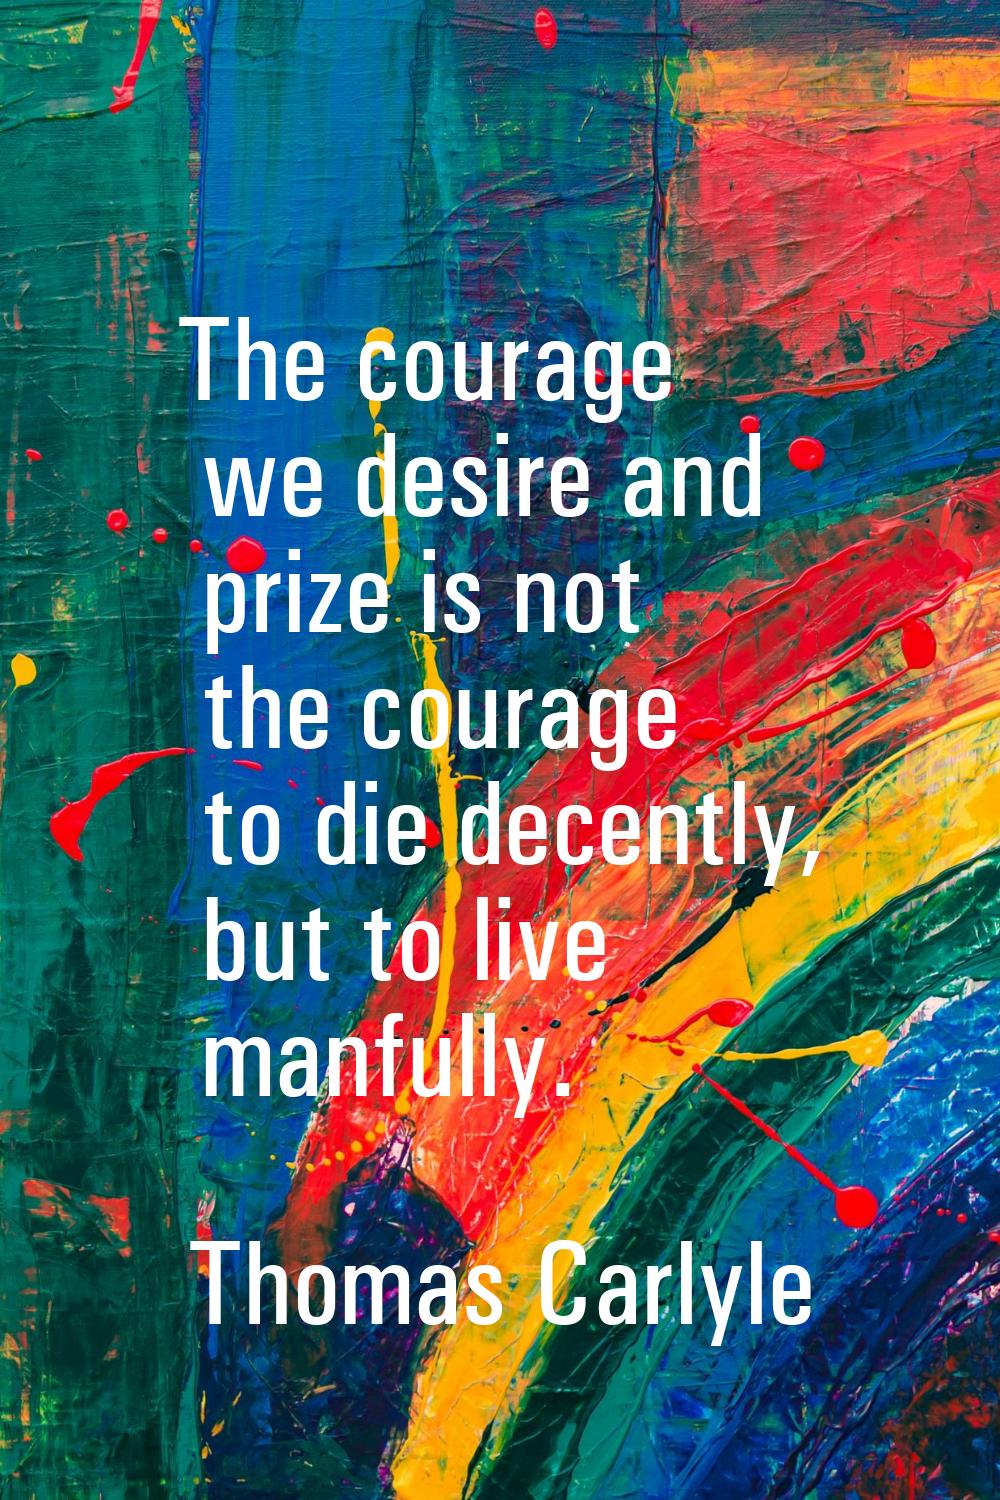 The courage we desire and prize is not the courage to die decently, but to live manfully.